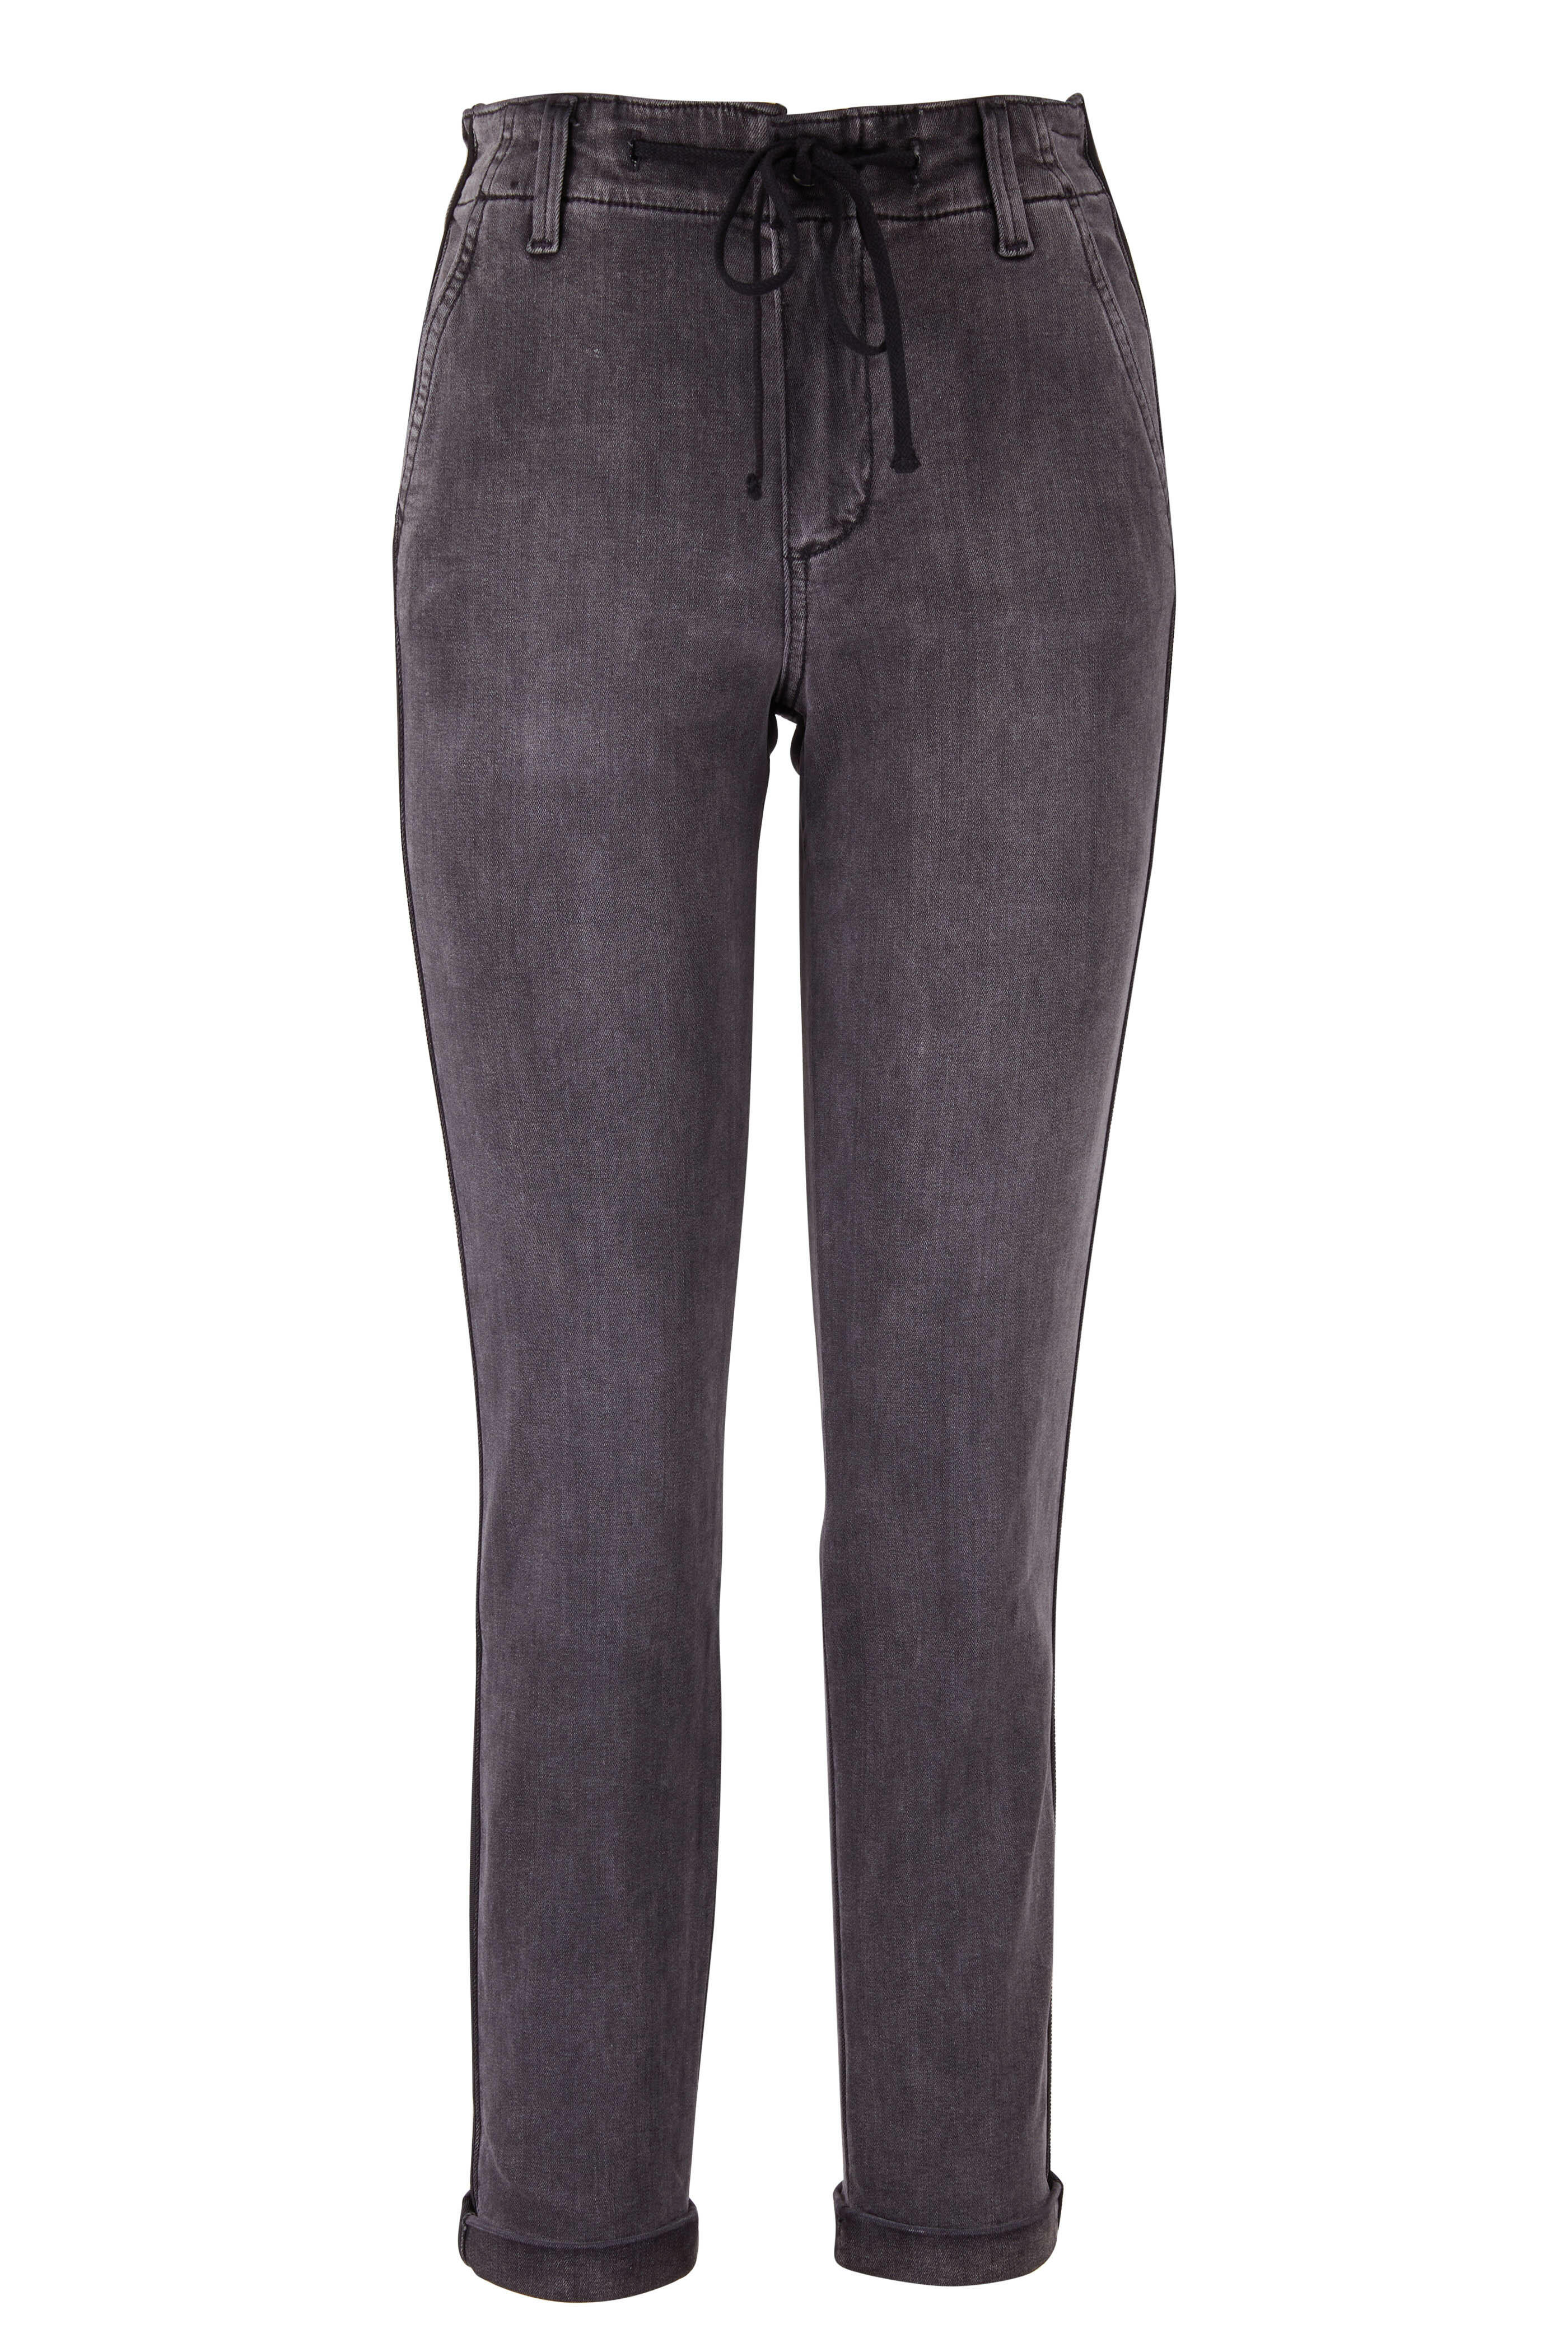 Paige - Christy Faded Mist Drawstring Cuffed Pant